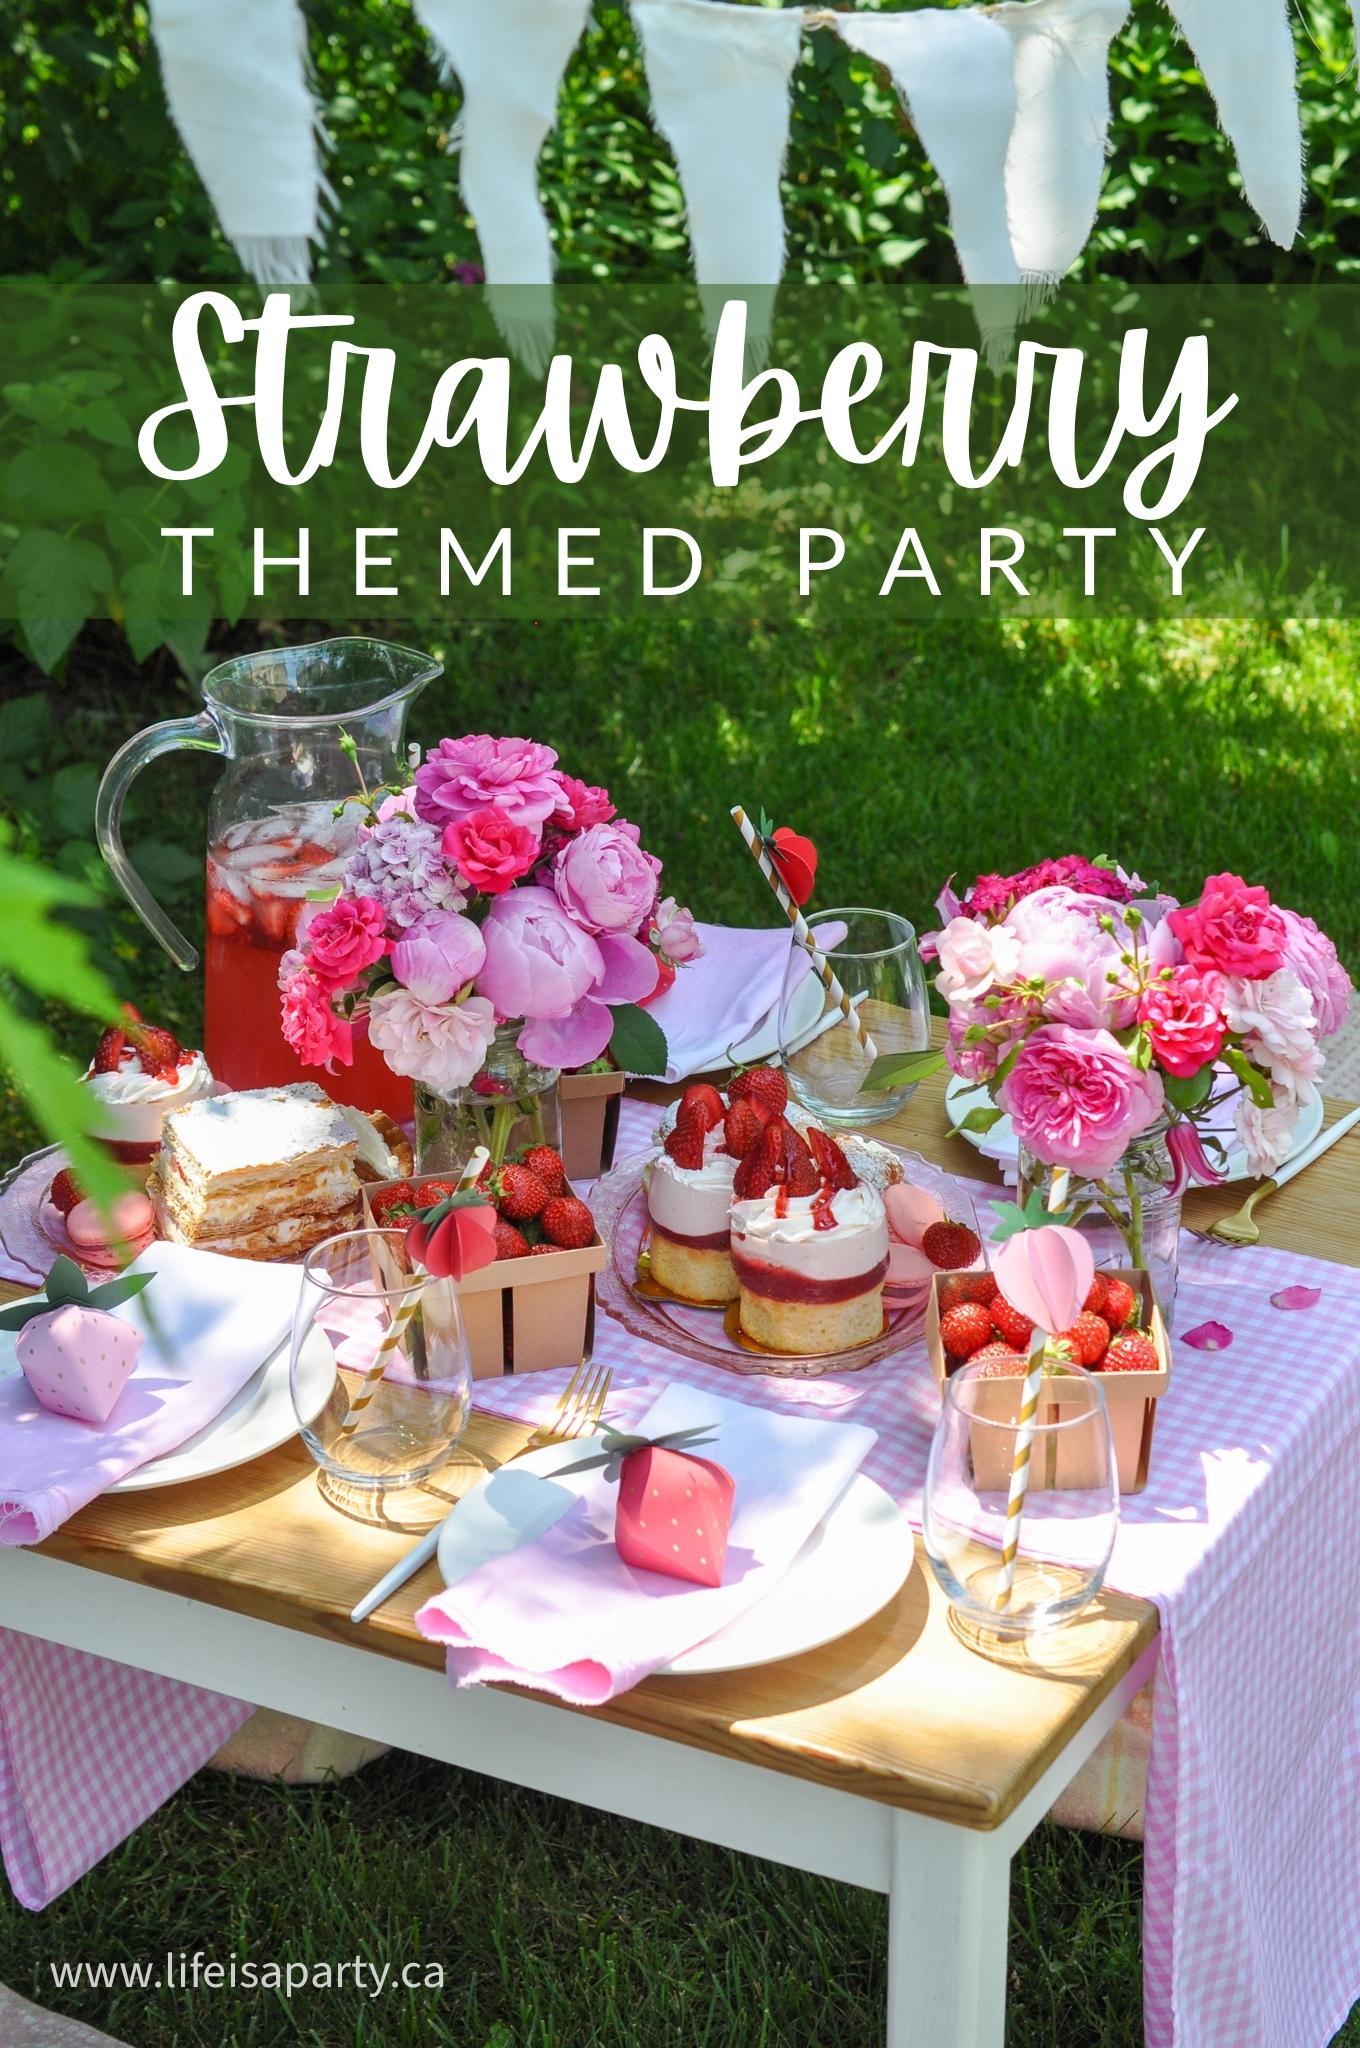 Sweet Strawberry Theme Party: DIY strawberry party decorations made with Cricut, picnic tablescape, and strawberry dessert menu.